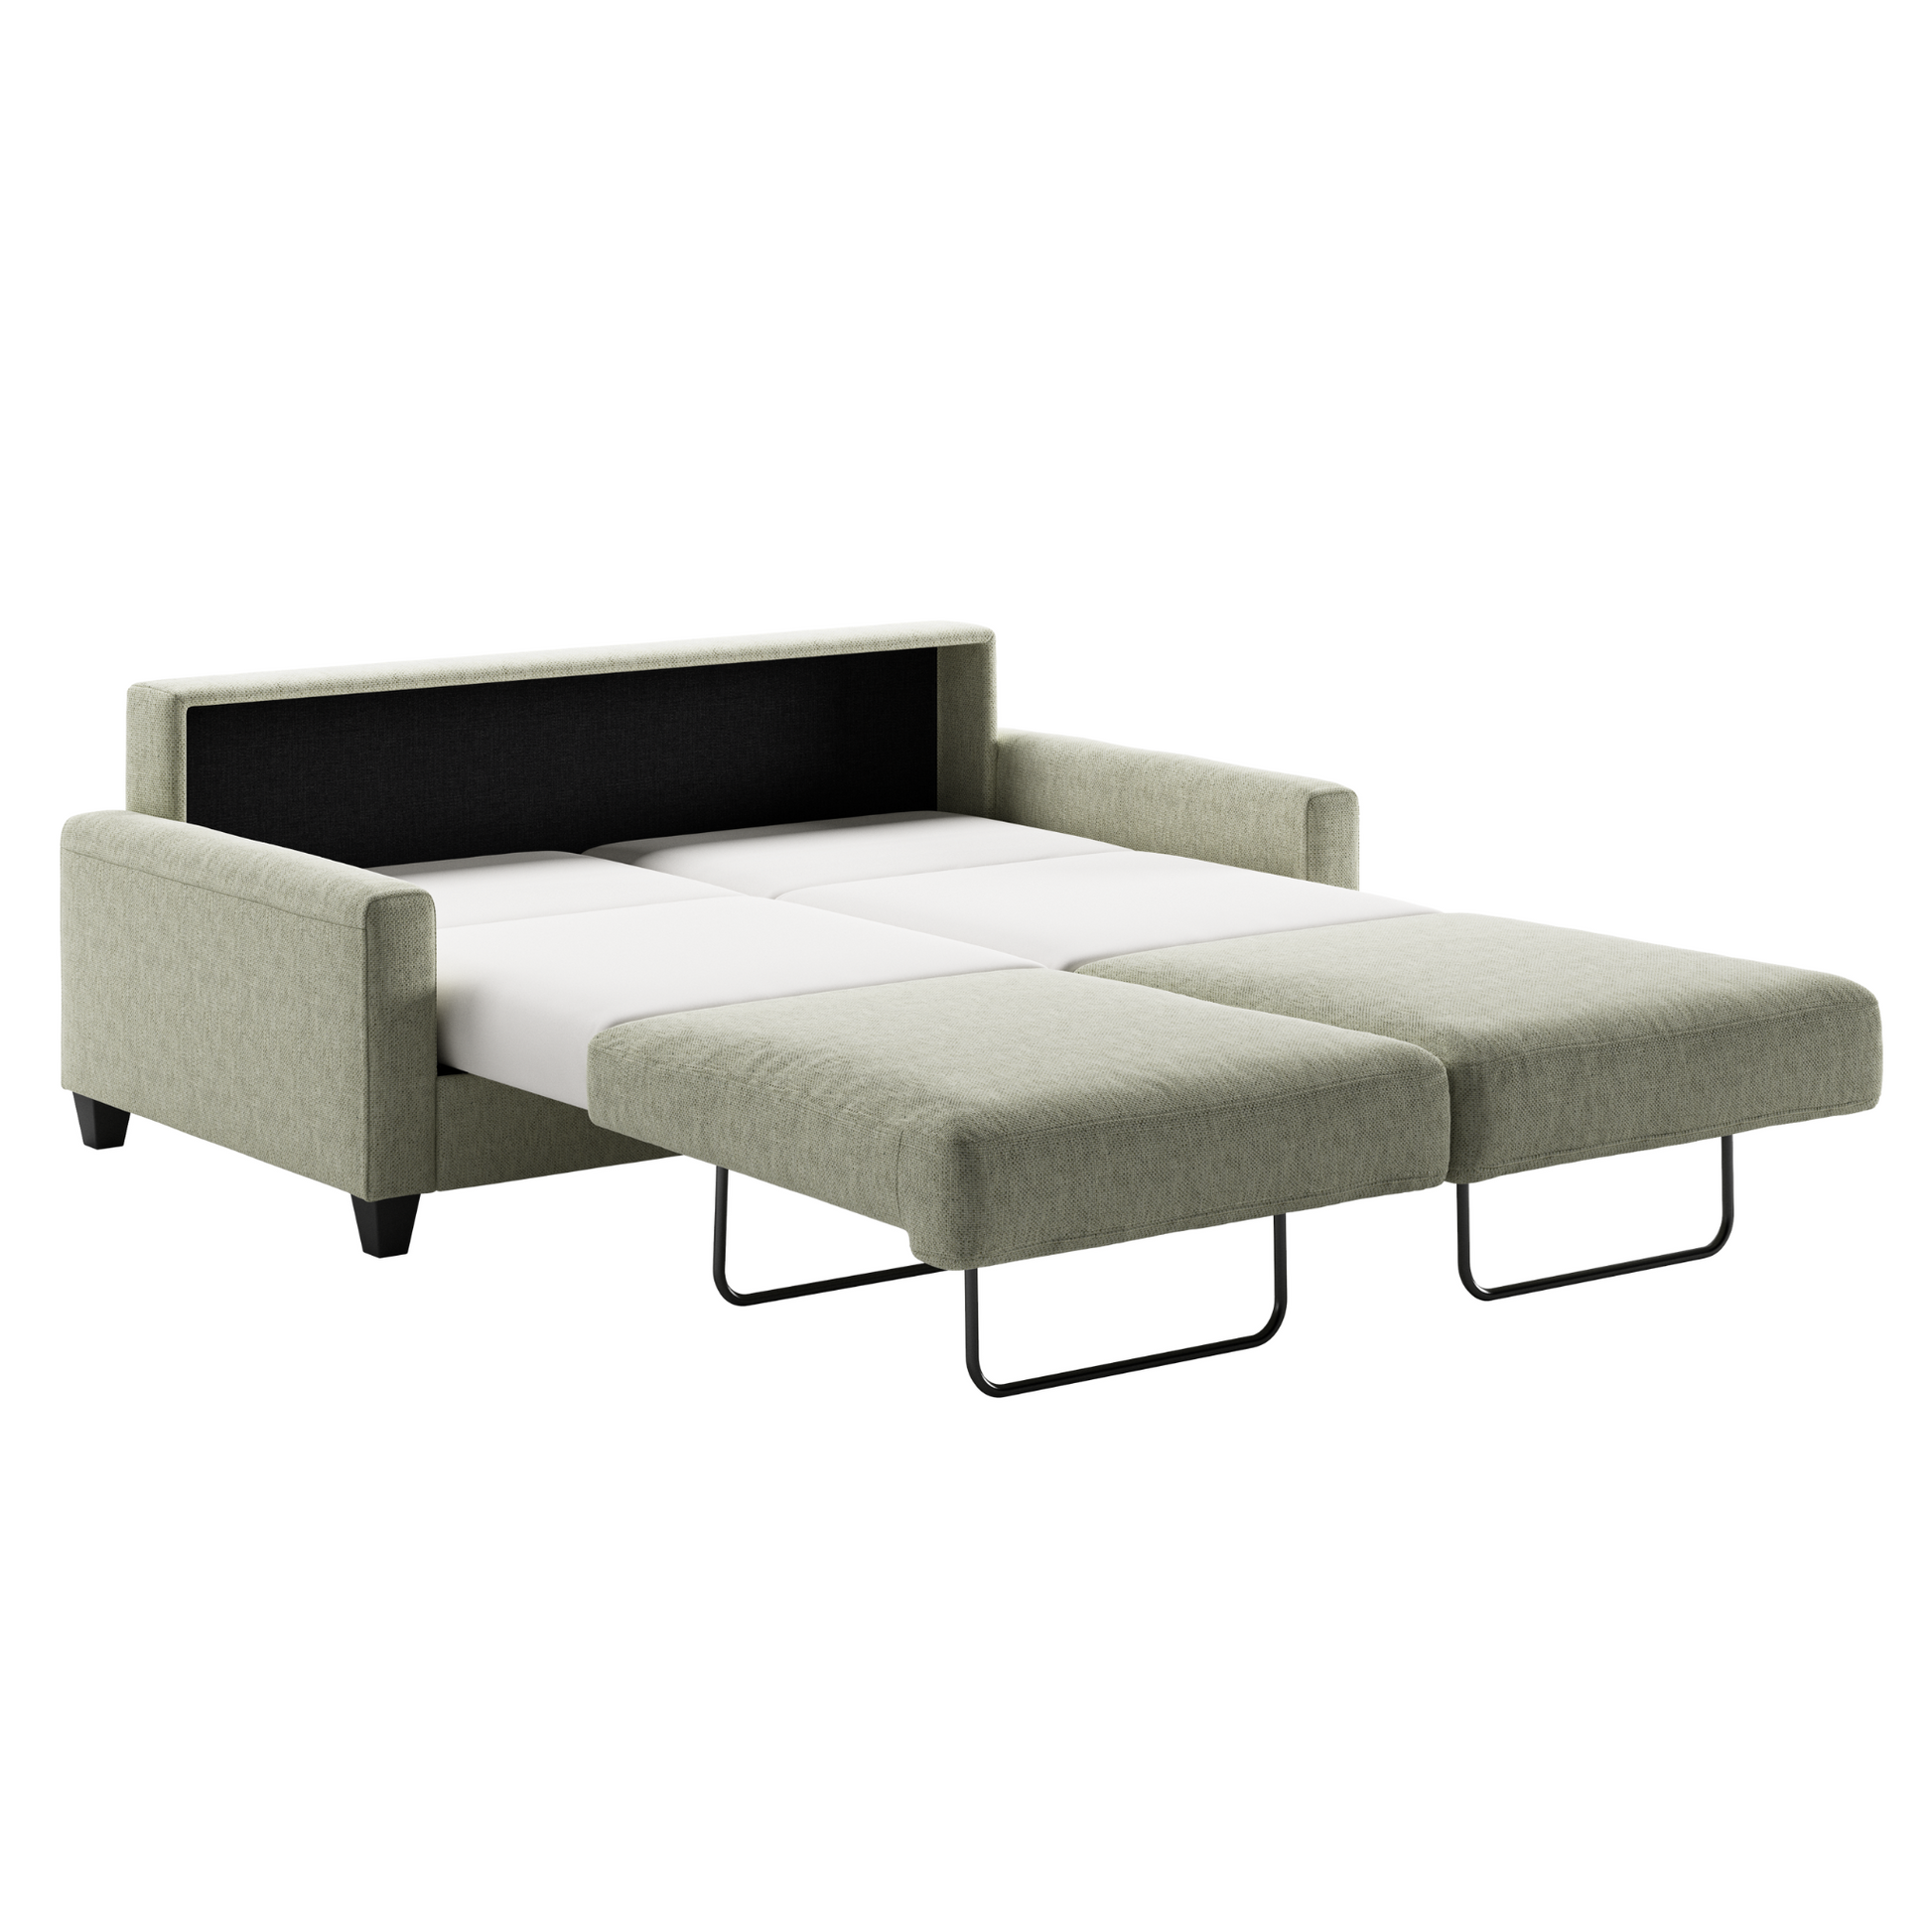 	Luonto Nico Queen Sleeper Sofa Quick Ship Program Loule 616 Fabric (beige) with Wood Leg and Open Sleeper Side View